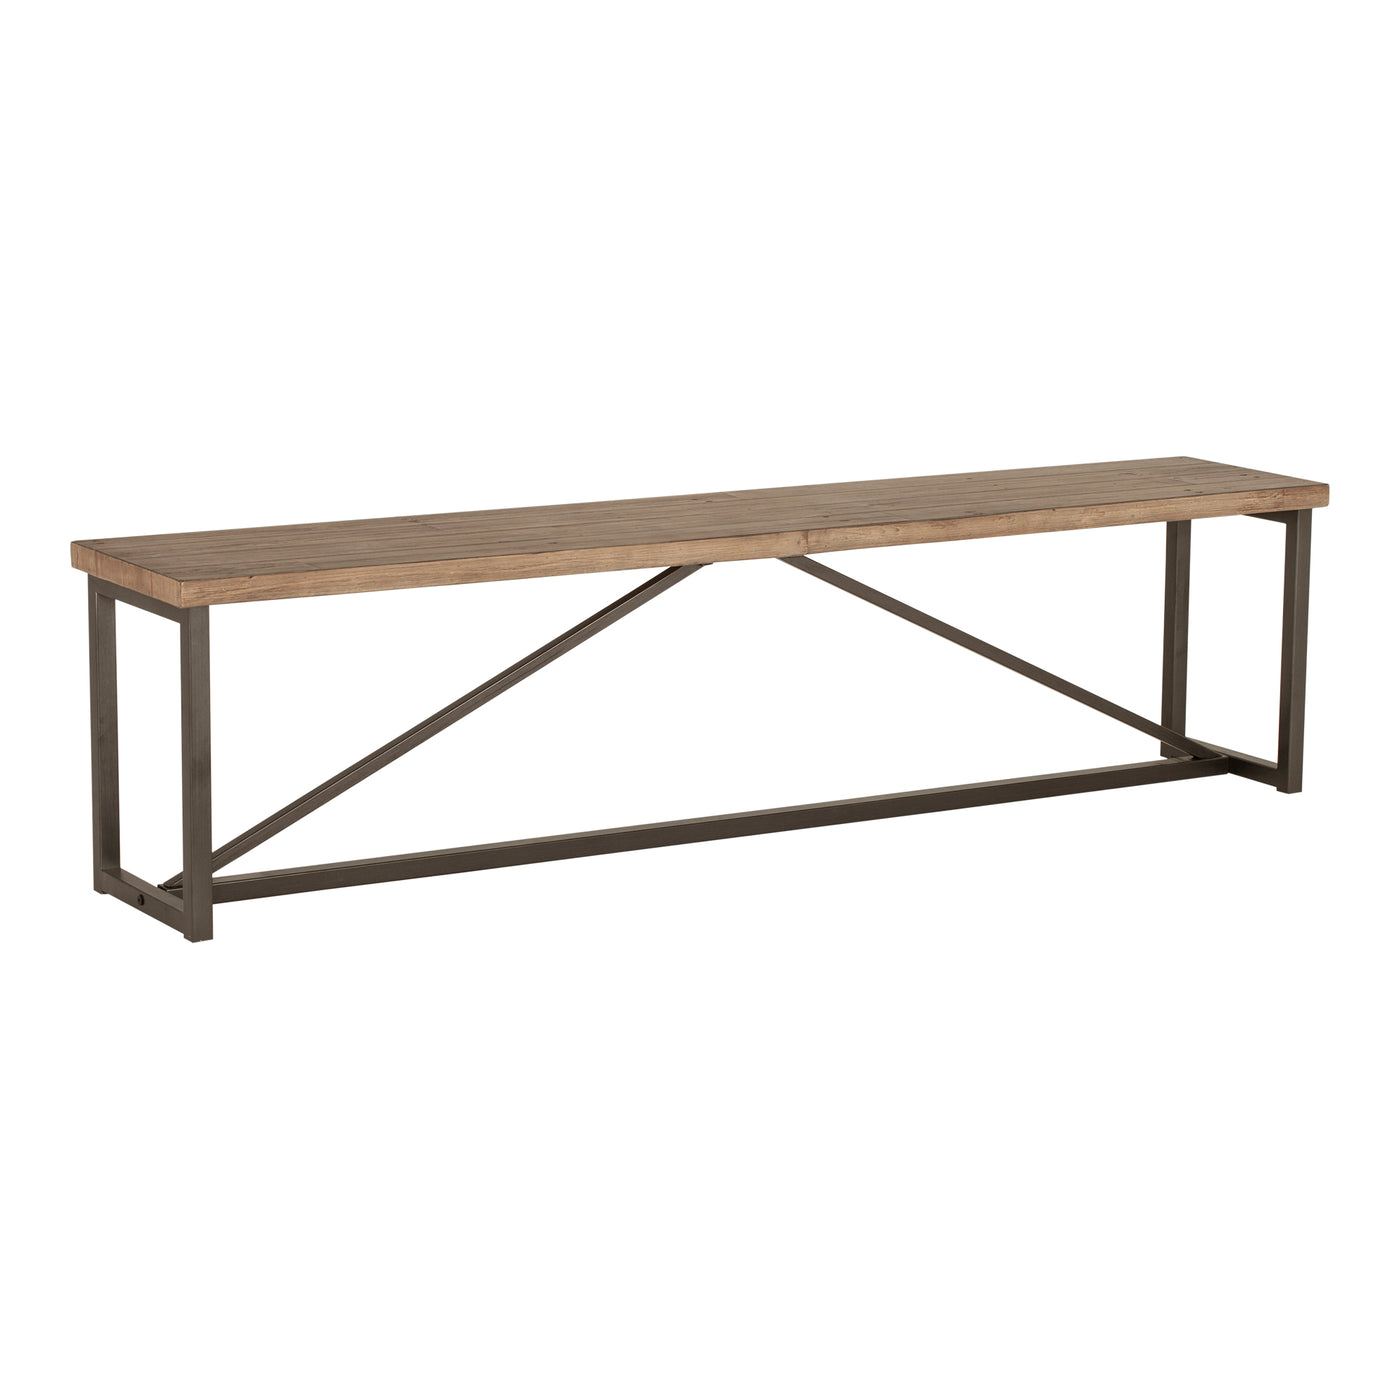 An airy metal base gives the Sierra Bench a sleek industrial look. Finished with a solid reclaimed pine top, this bench fe...